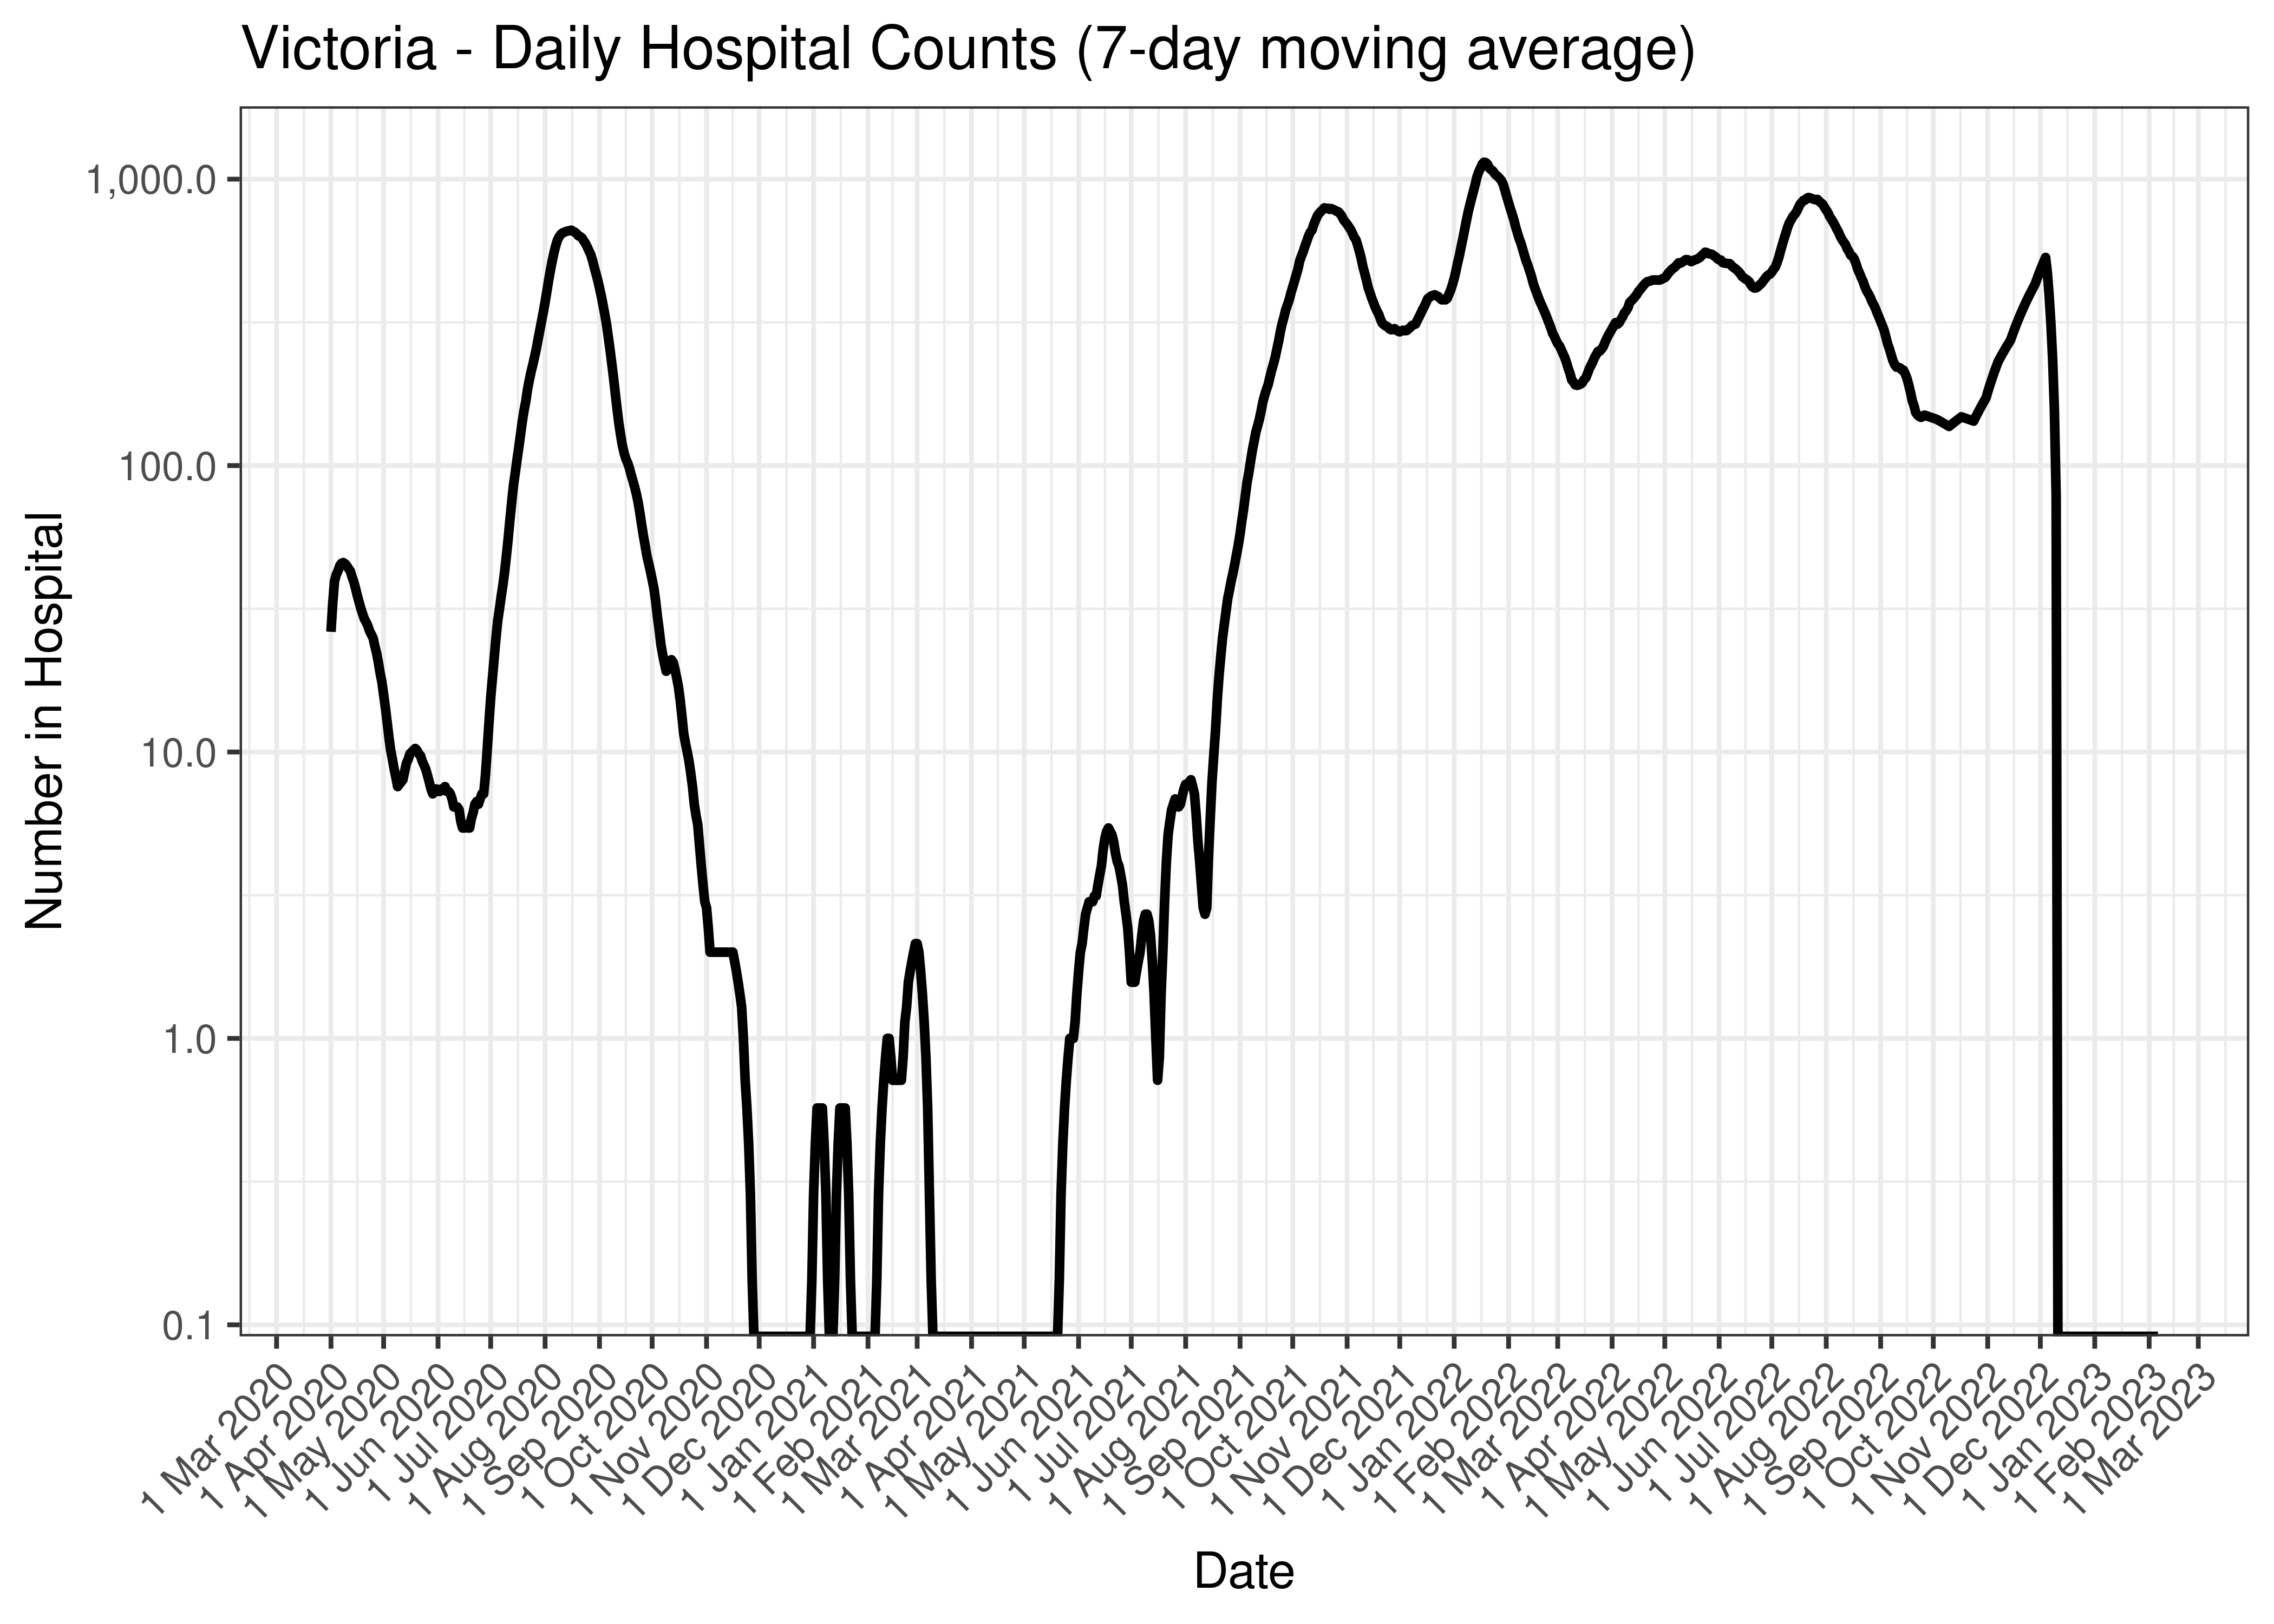 Victoria - Daily Hospital Counts (7-day moving average)